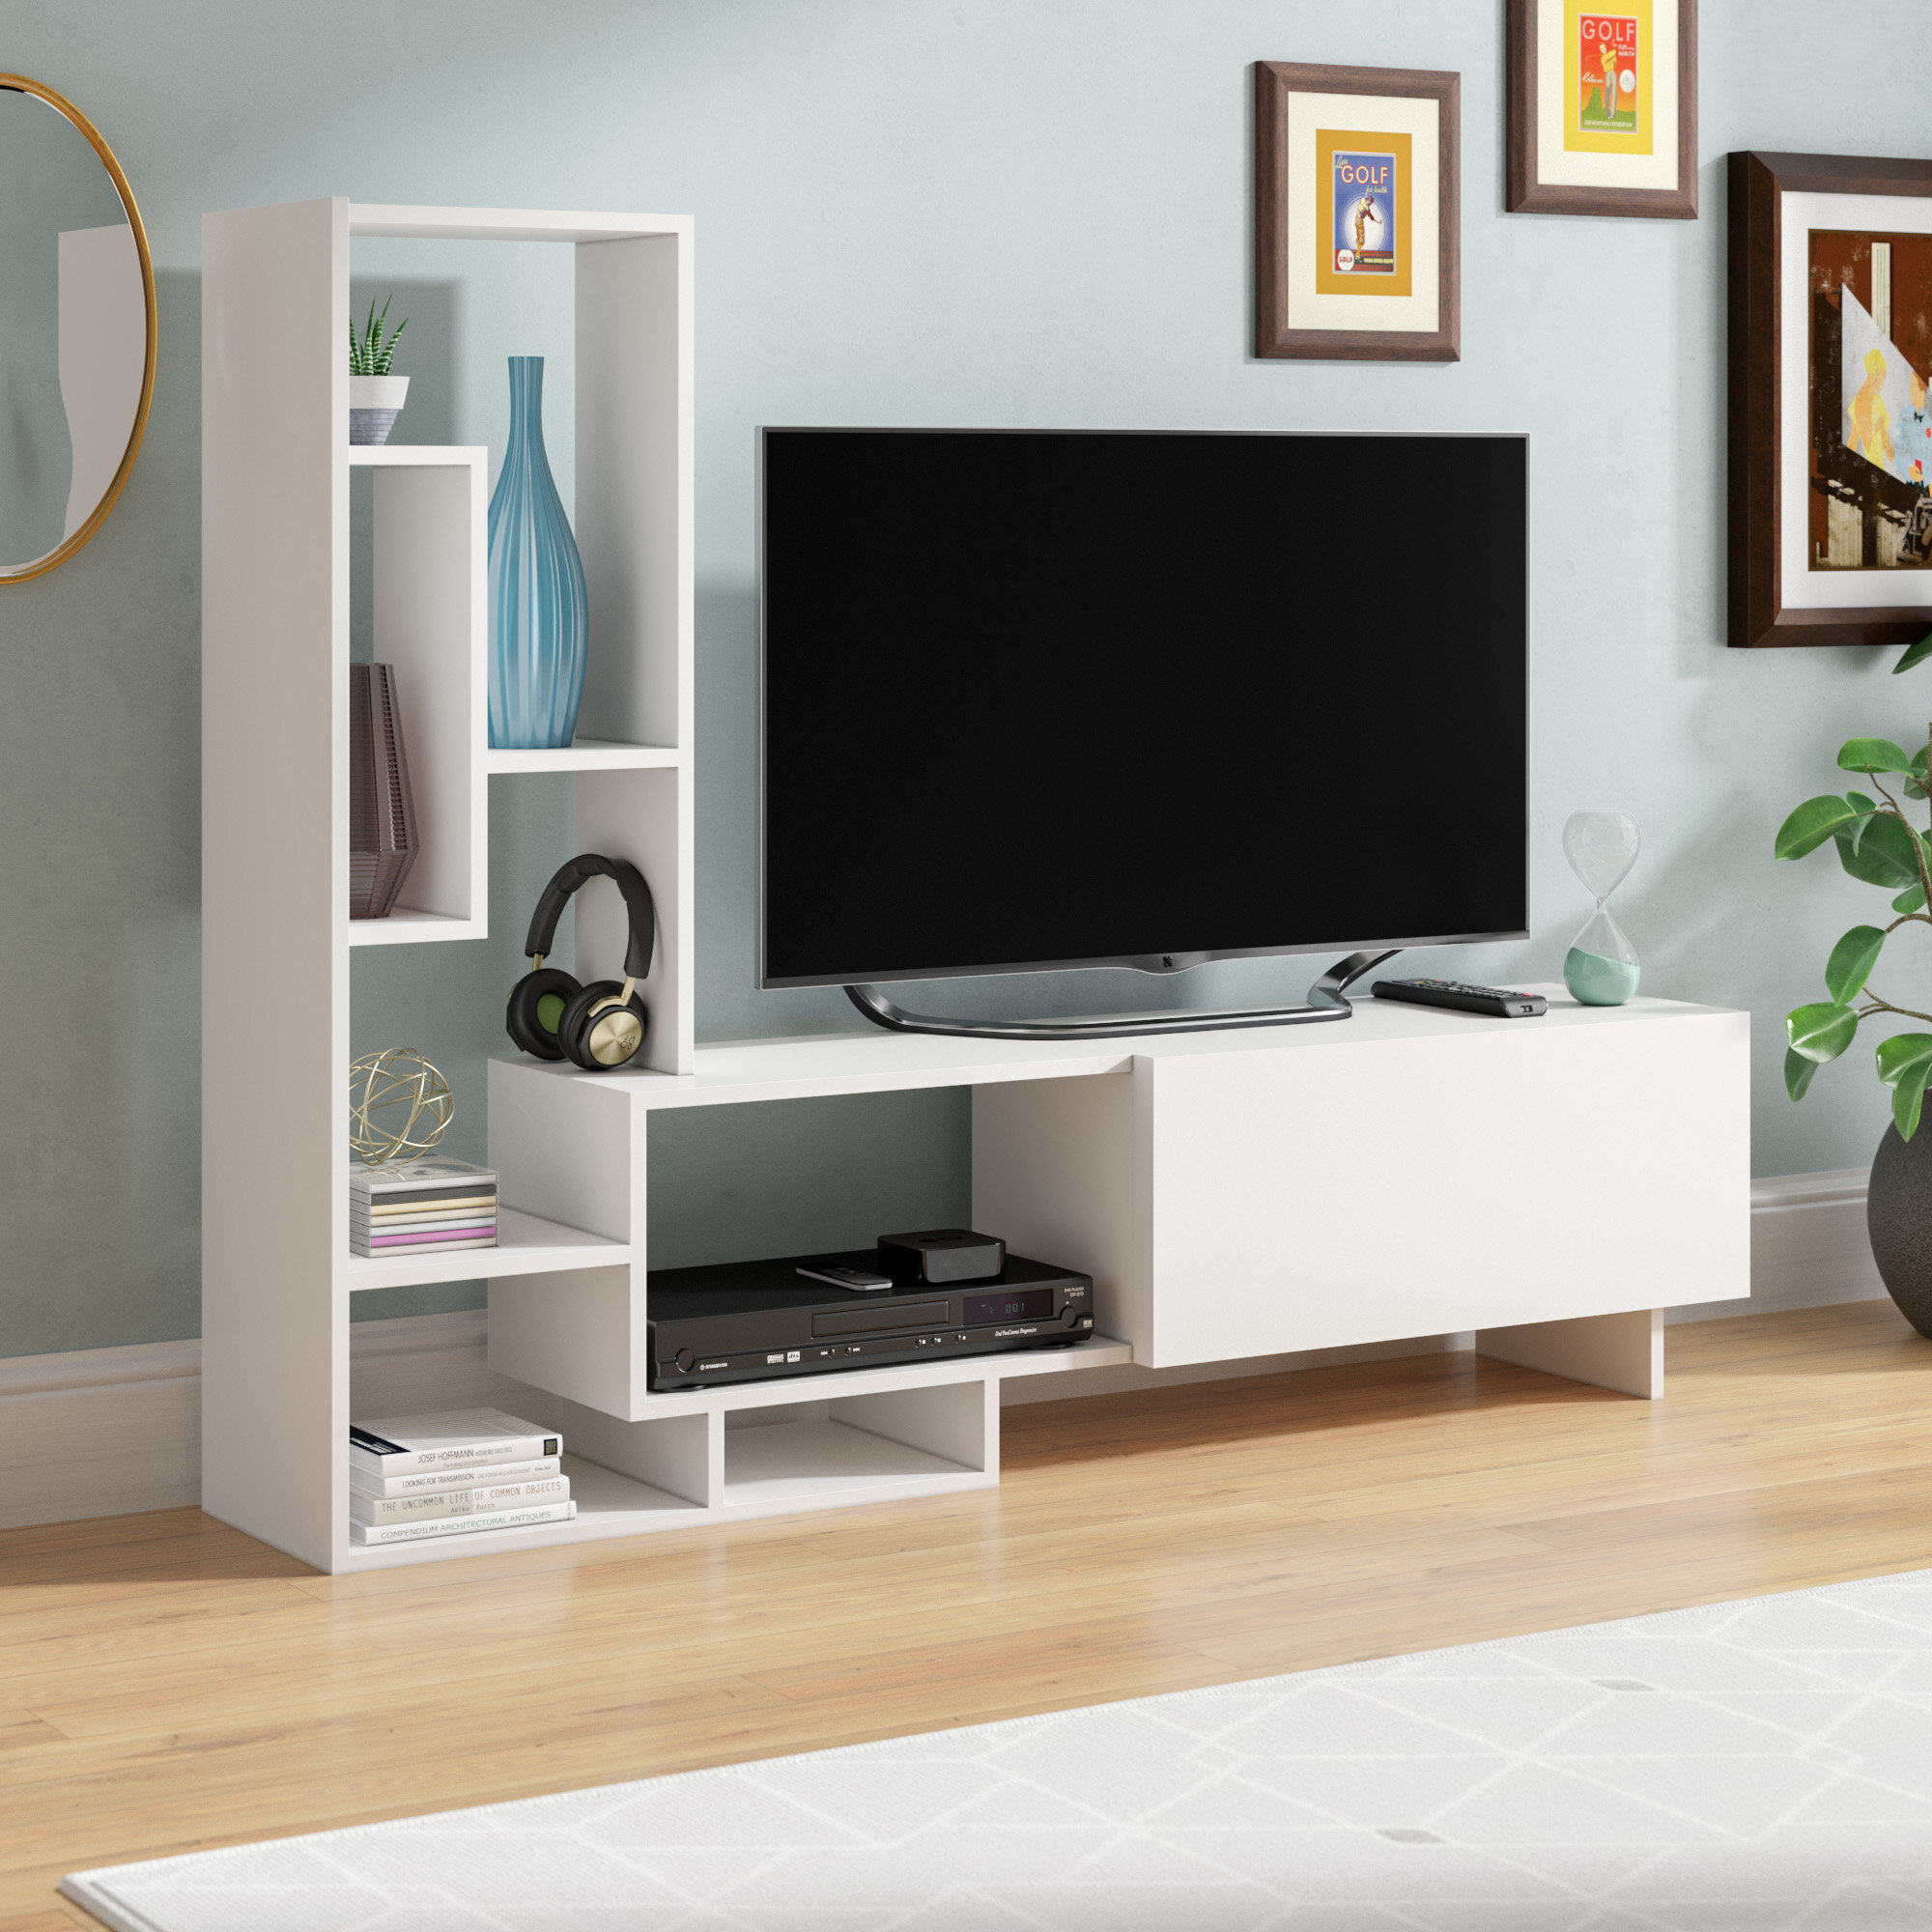 TV stand white and oak sonoma great size modern design! High quality TV unit 